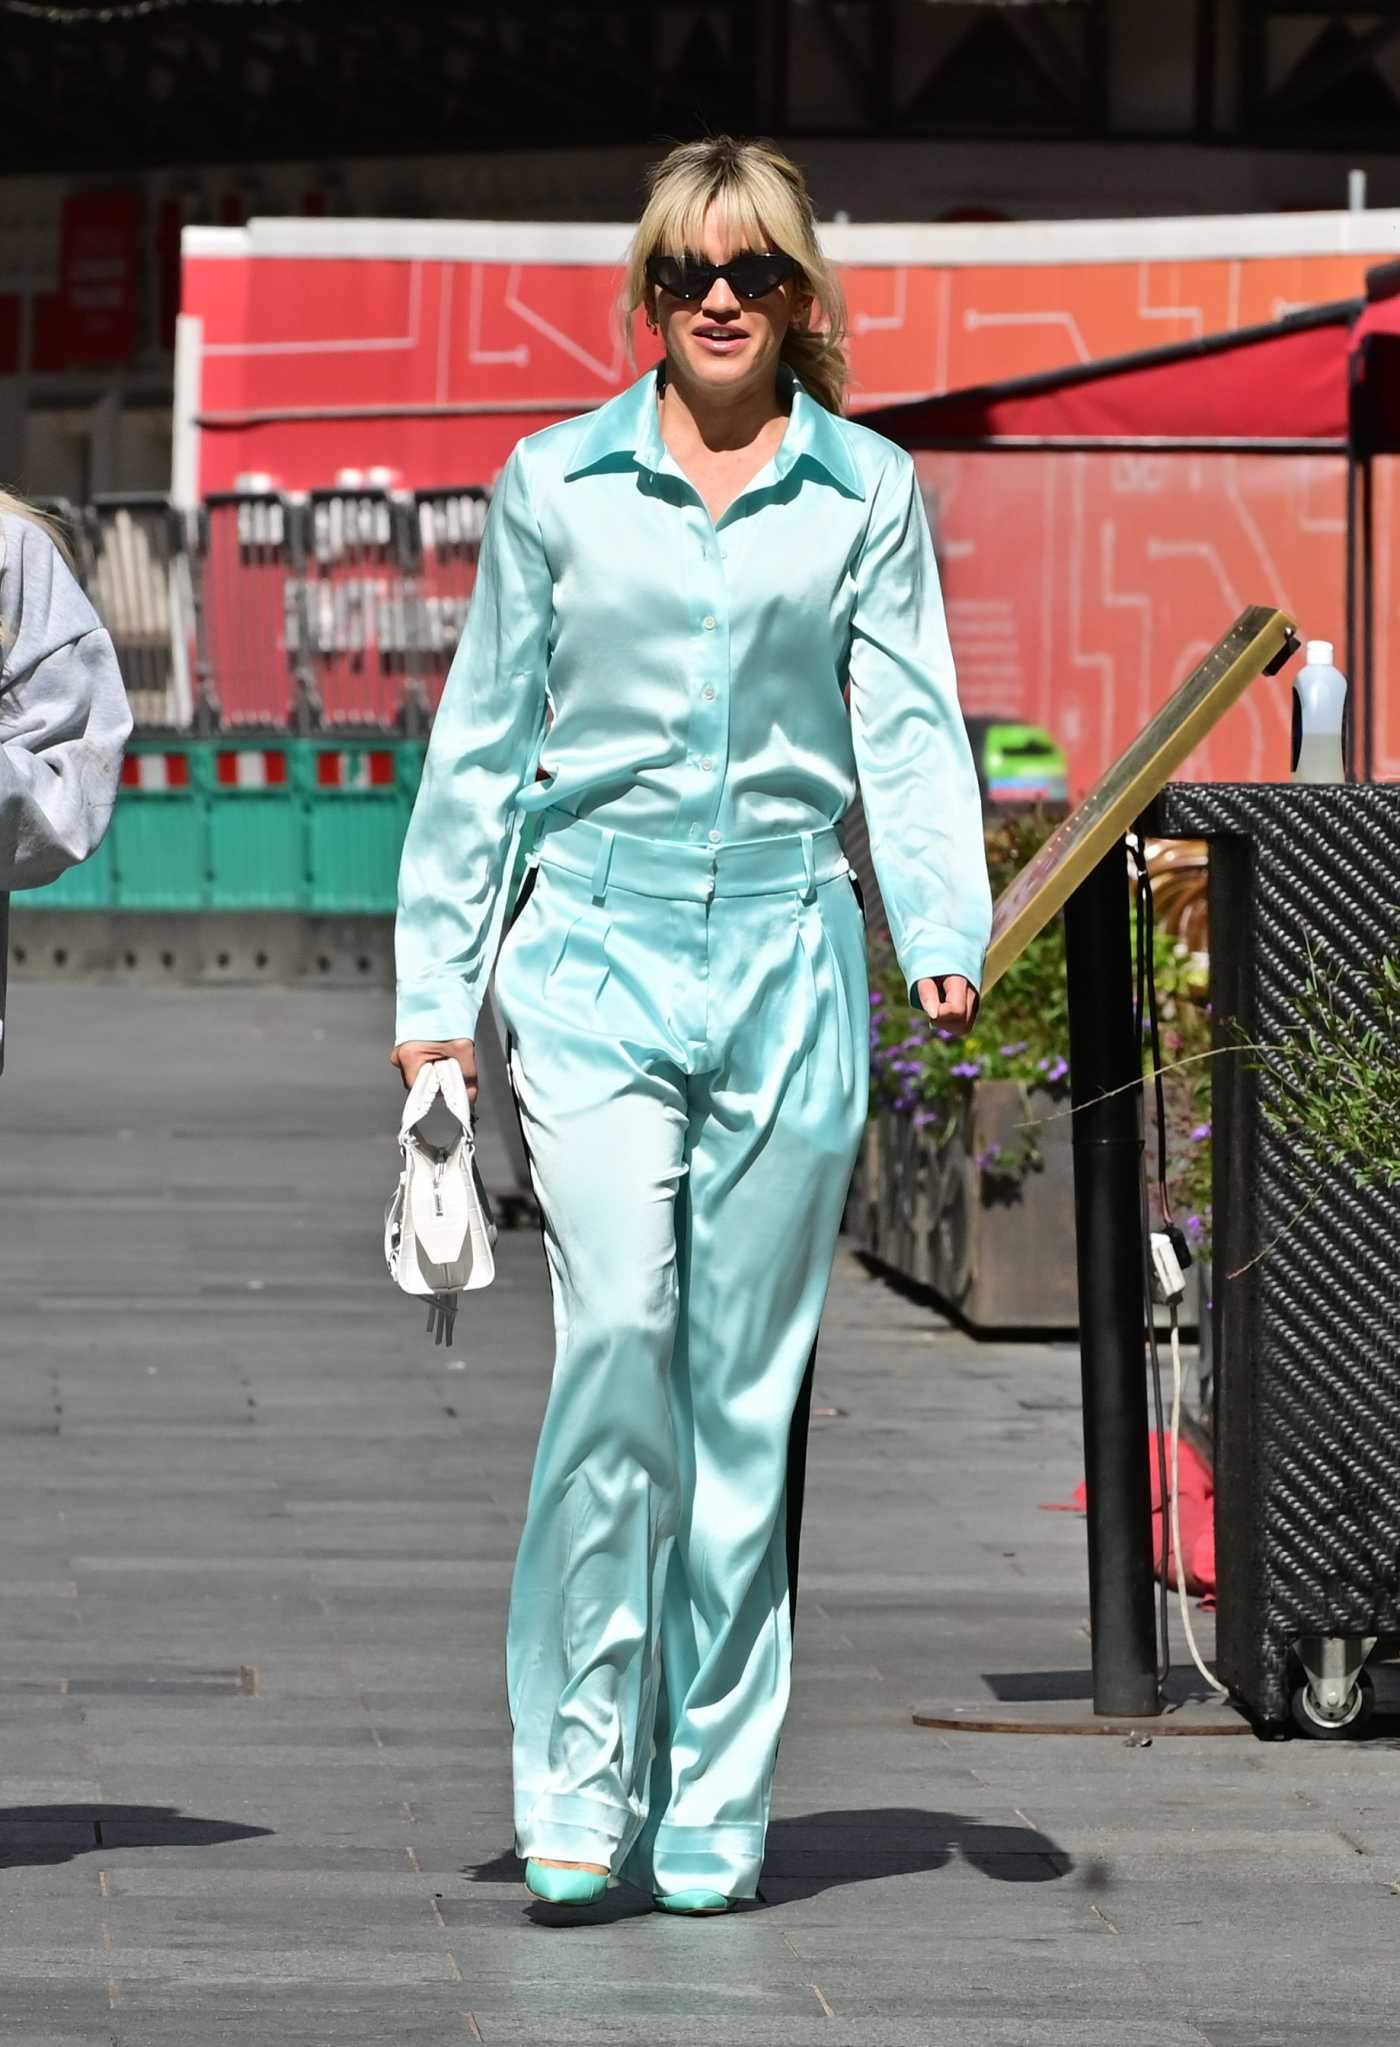 Ashley Roberts in a Turquoise Pantsuit Leaves the Heart Radio in London 07/04/2022